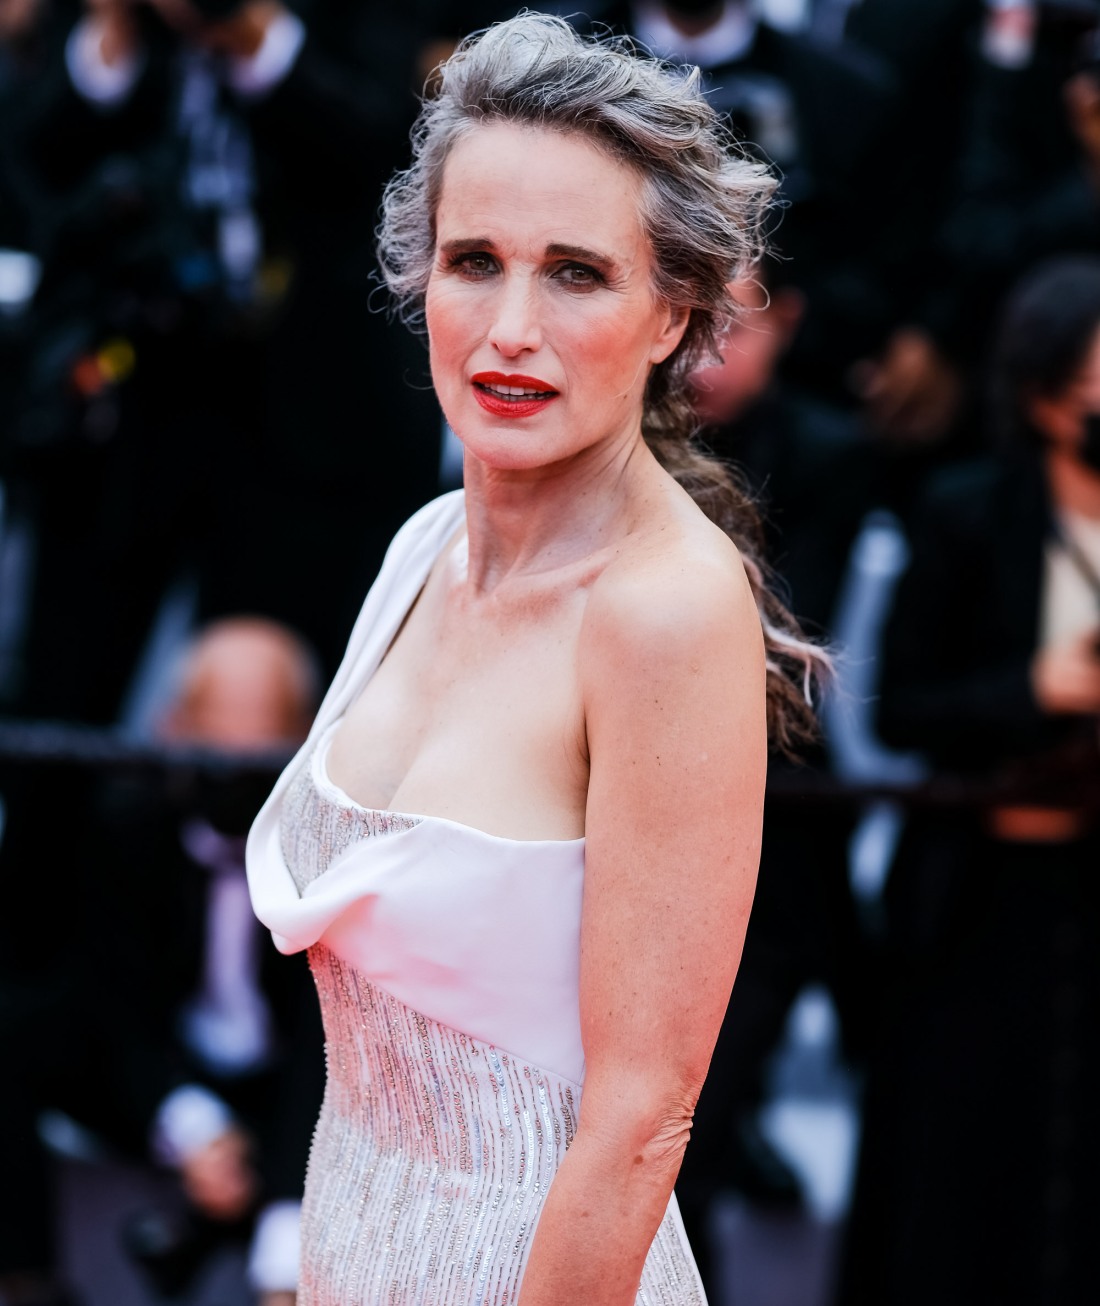 Andie MacDowell poses at the Red Carpet for TOUT S’EST BIEN PASSE - Everything Went Fine during the 74th Cannes International Film Festival on Wednesday 7 July 2021